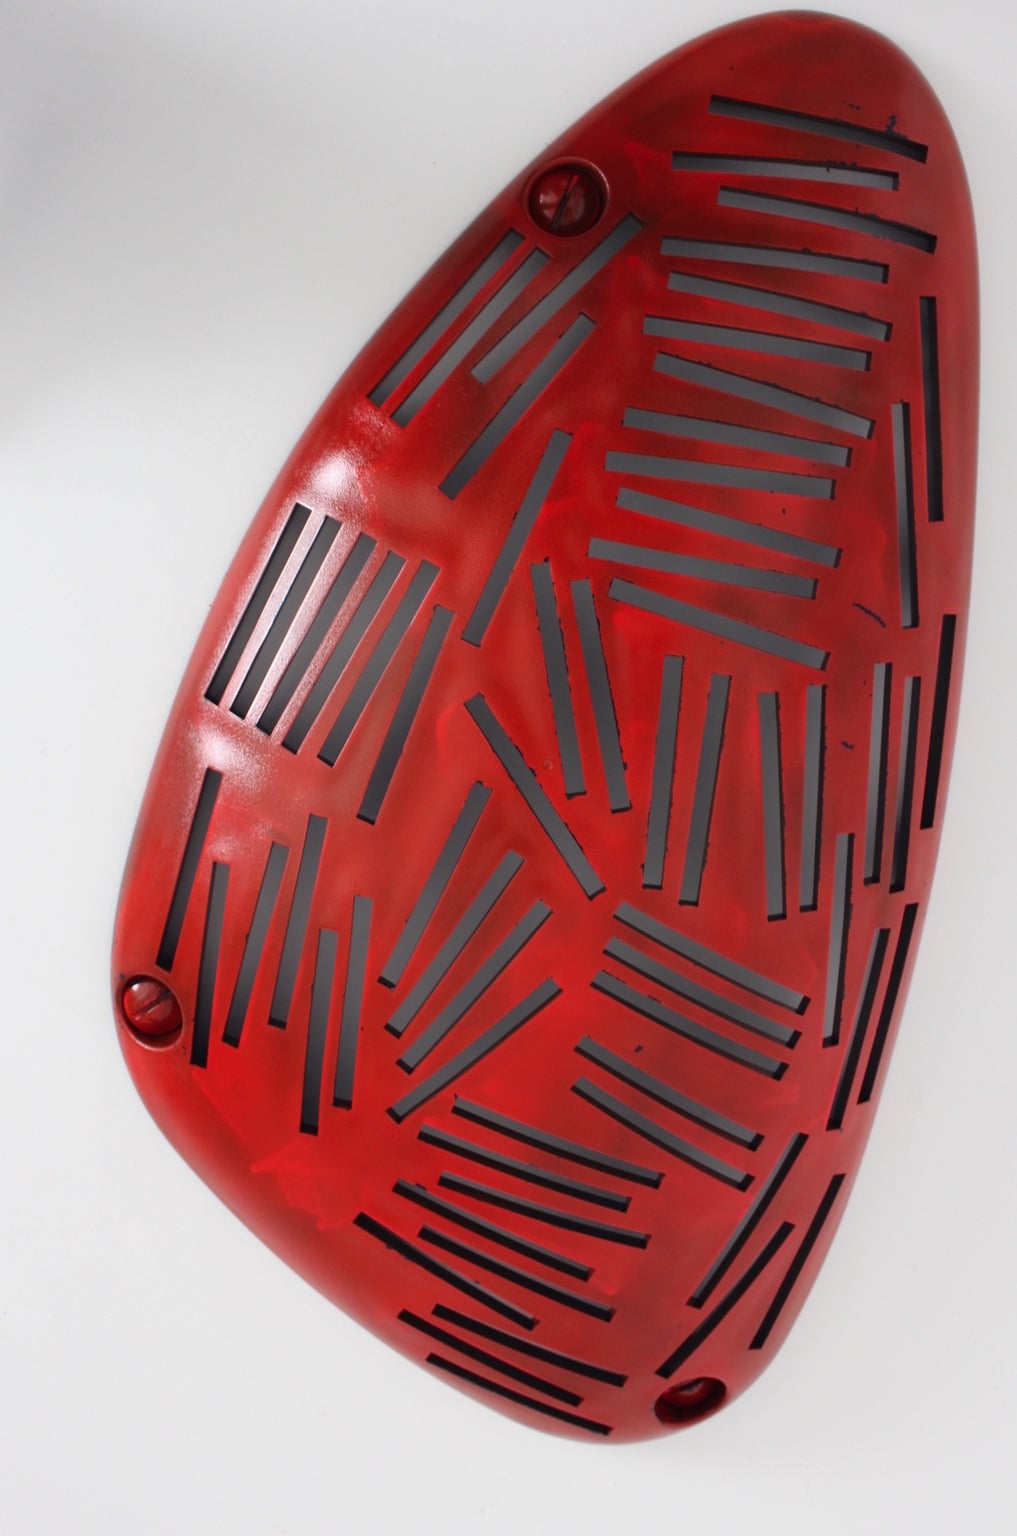 A red lacquered modern red vintage plastic wall shelf, which fits for 65 pieces of compact discs.
The wall shelf was designed by Enzo Calabrese and produced by Guzzini, Italy.
very good condition
approx. measures:
Width 49 cm
Height 90 cm
Depth 12 cm